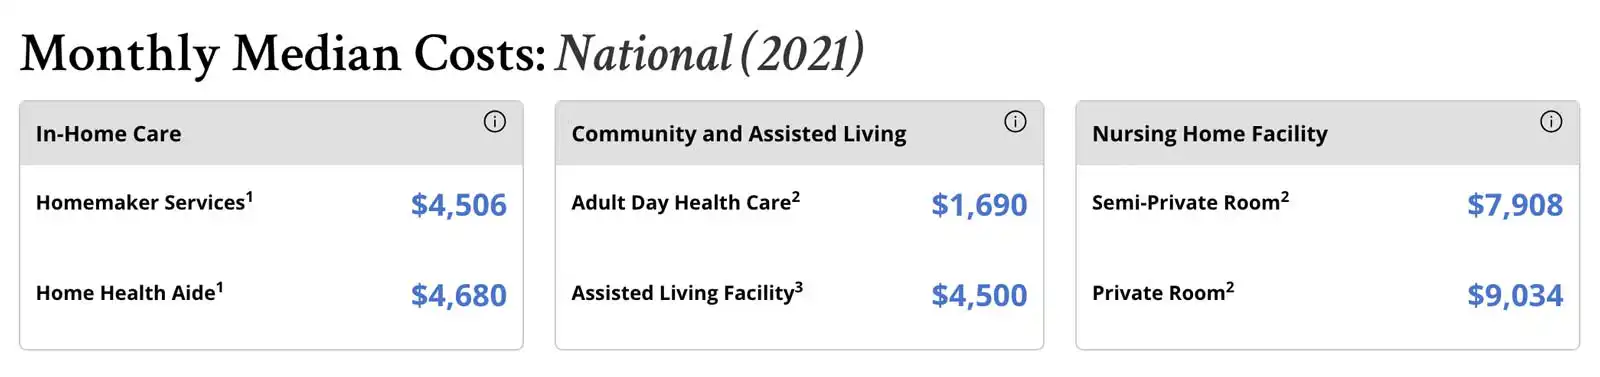 Chart showing monthly median costs for in-home care vs community and assisted living care and nursing home facility care.